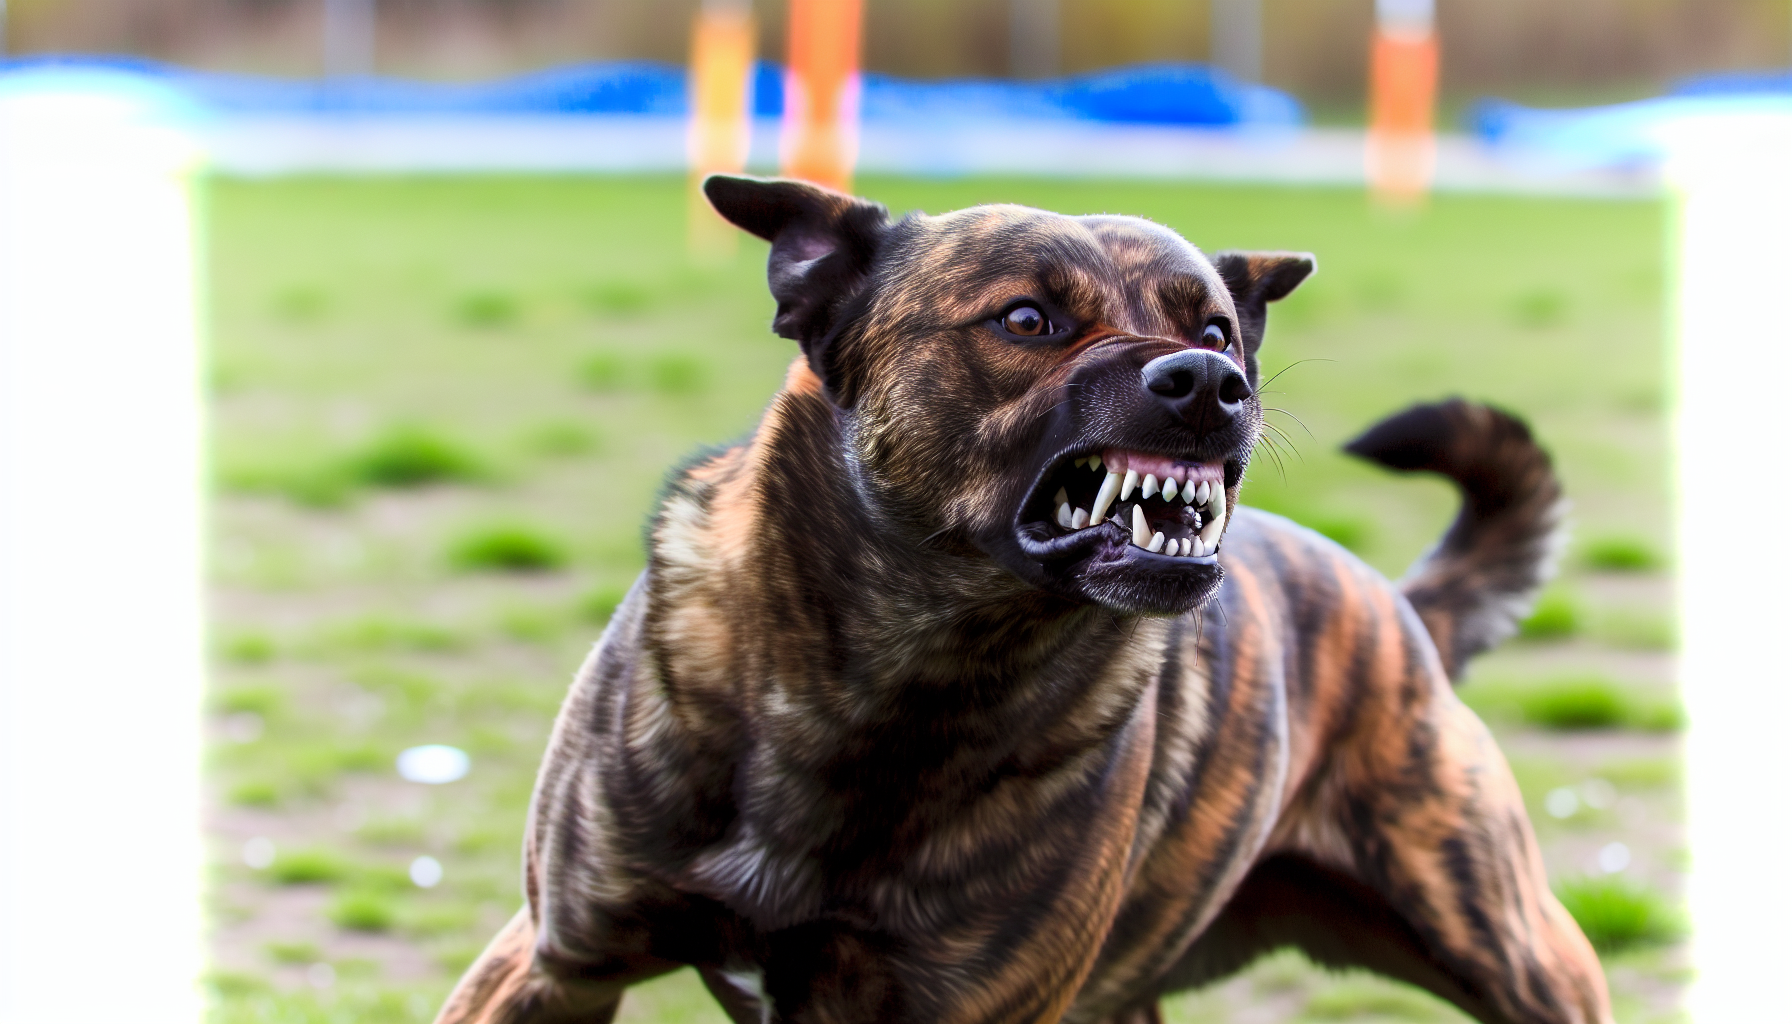 Aggressive dog showing teeth during training